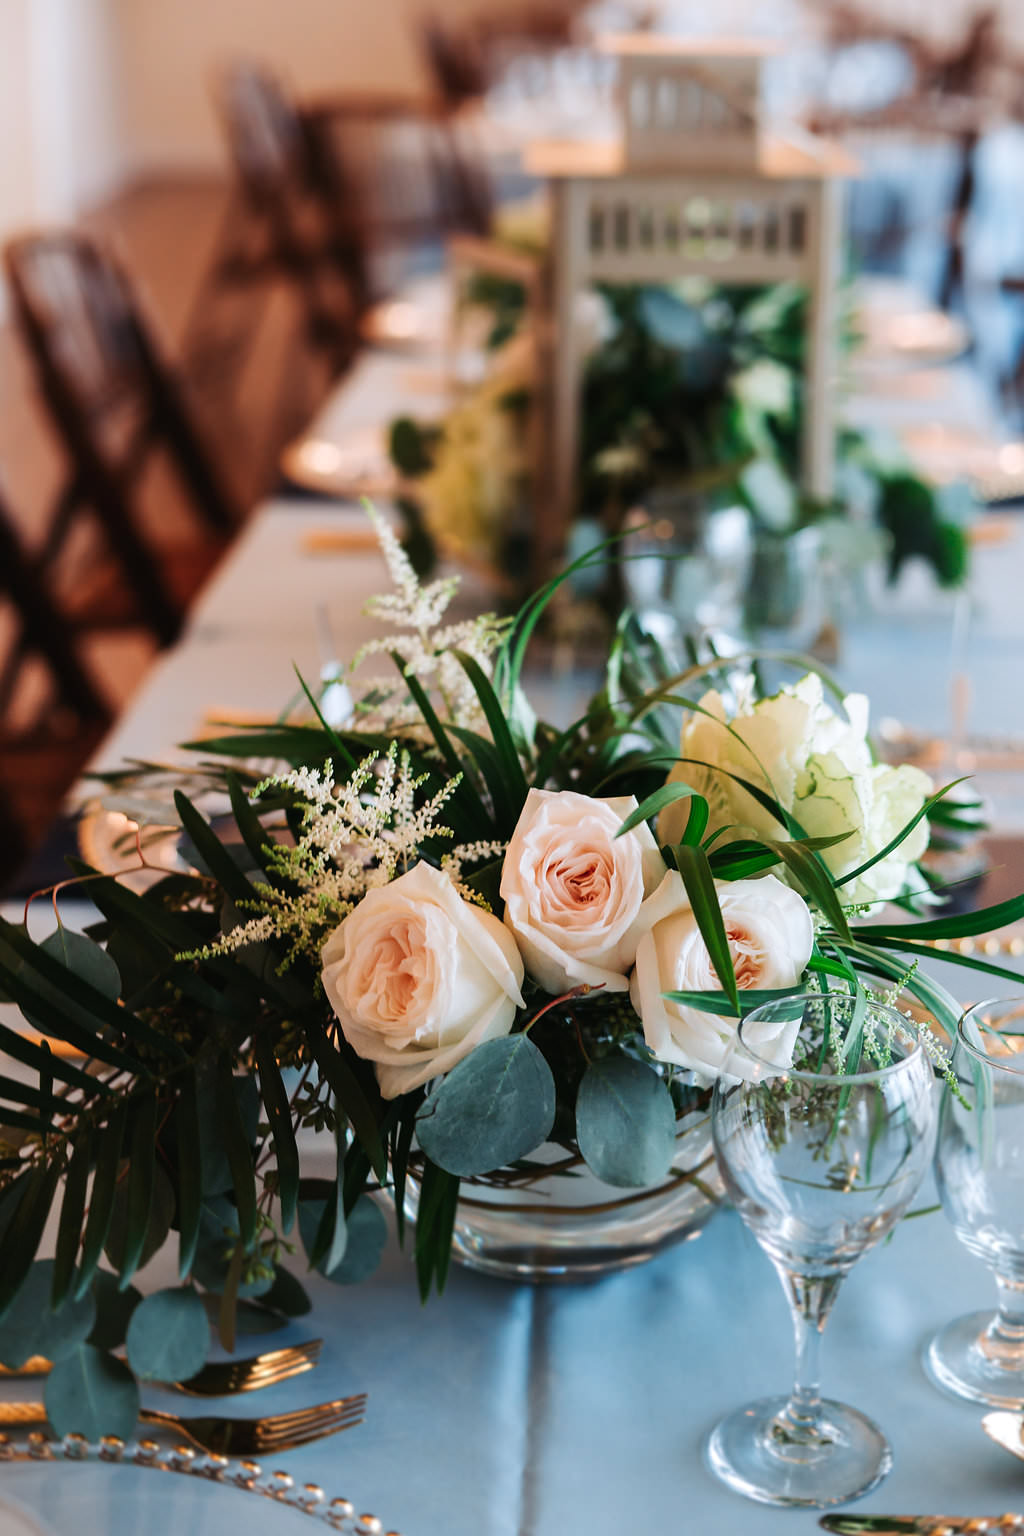 Elegant Coastal Glam Wedding Reception Table Decor with Low Blush Rose and Natural Greenery Centerpiece in Silver Bowl, with Blue Linens and Antique Old Florida Hurricane Lanterns